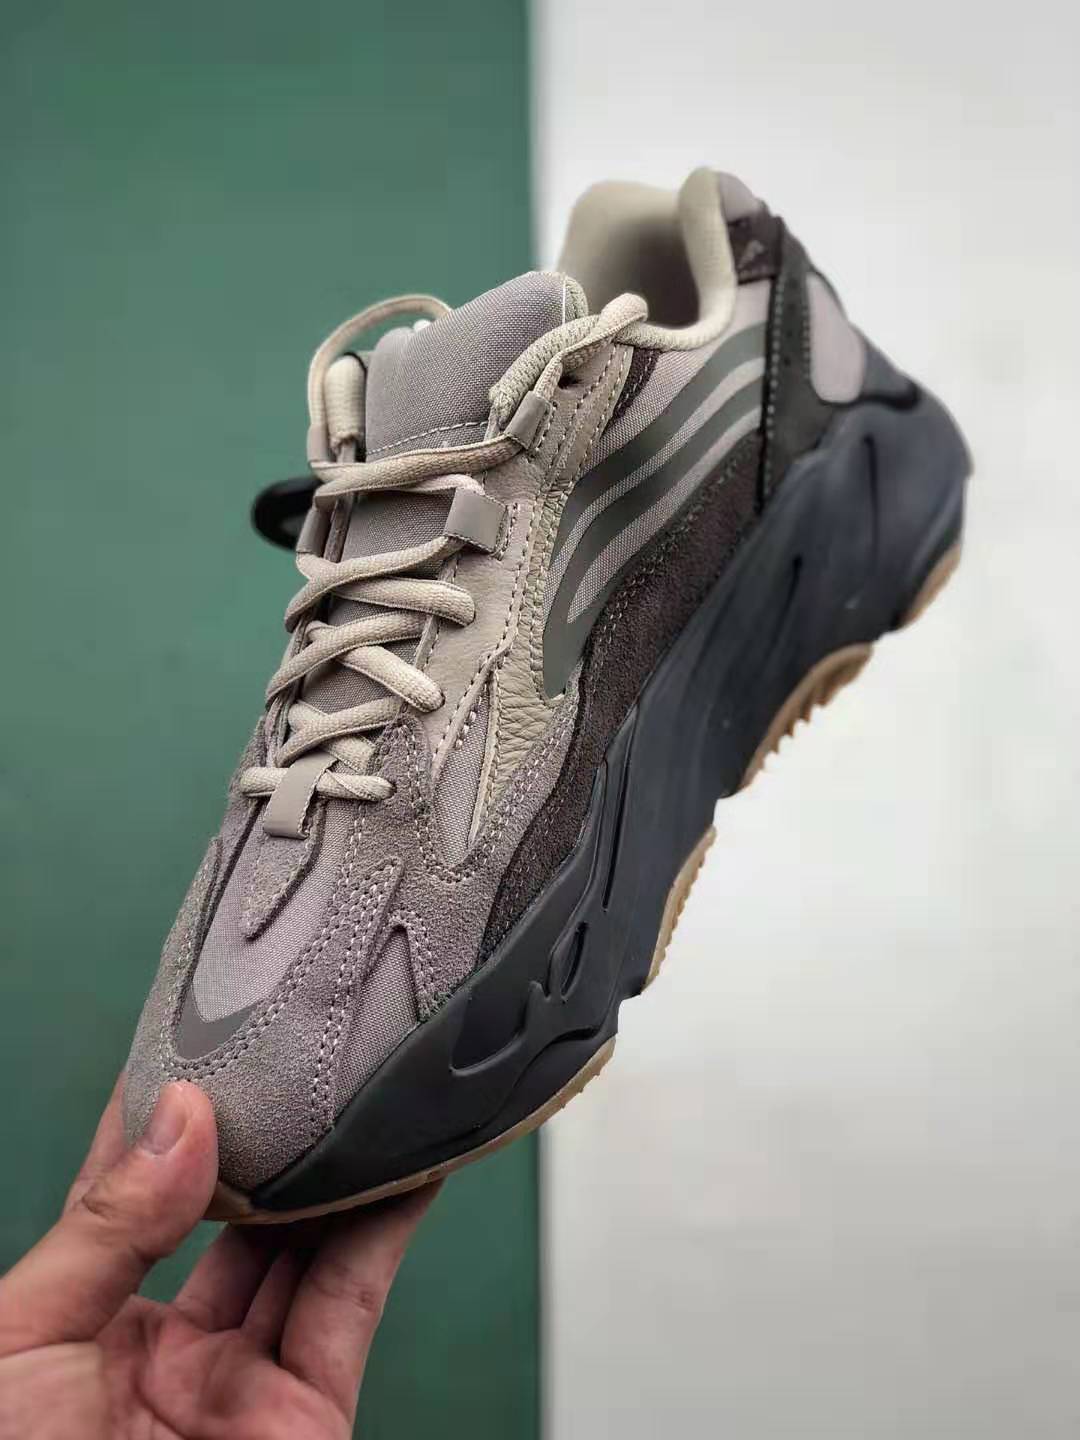 Adidas Yeezy Boost 700 V2 Tephra FU7914 - Premium Sneakers for Unmatched Style